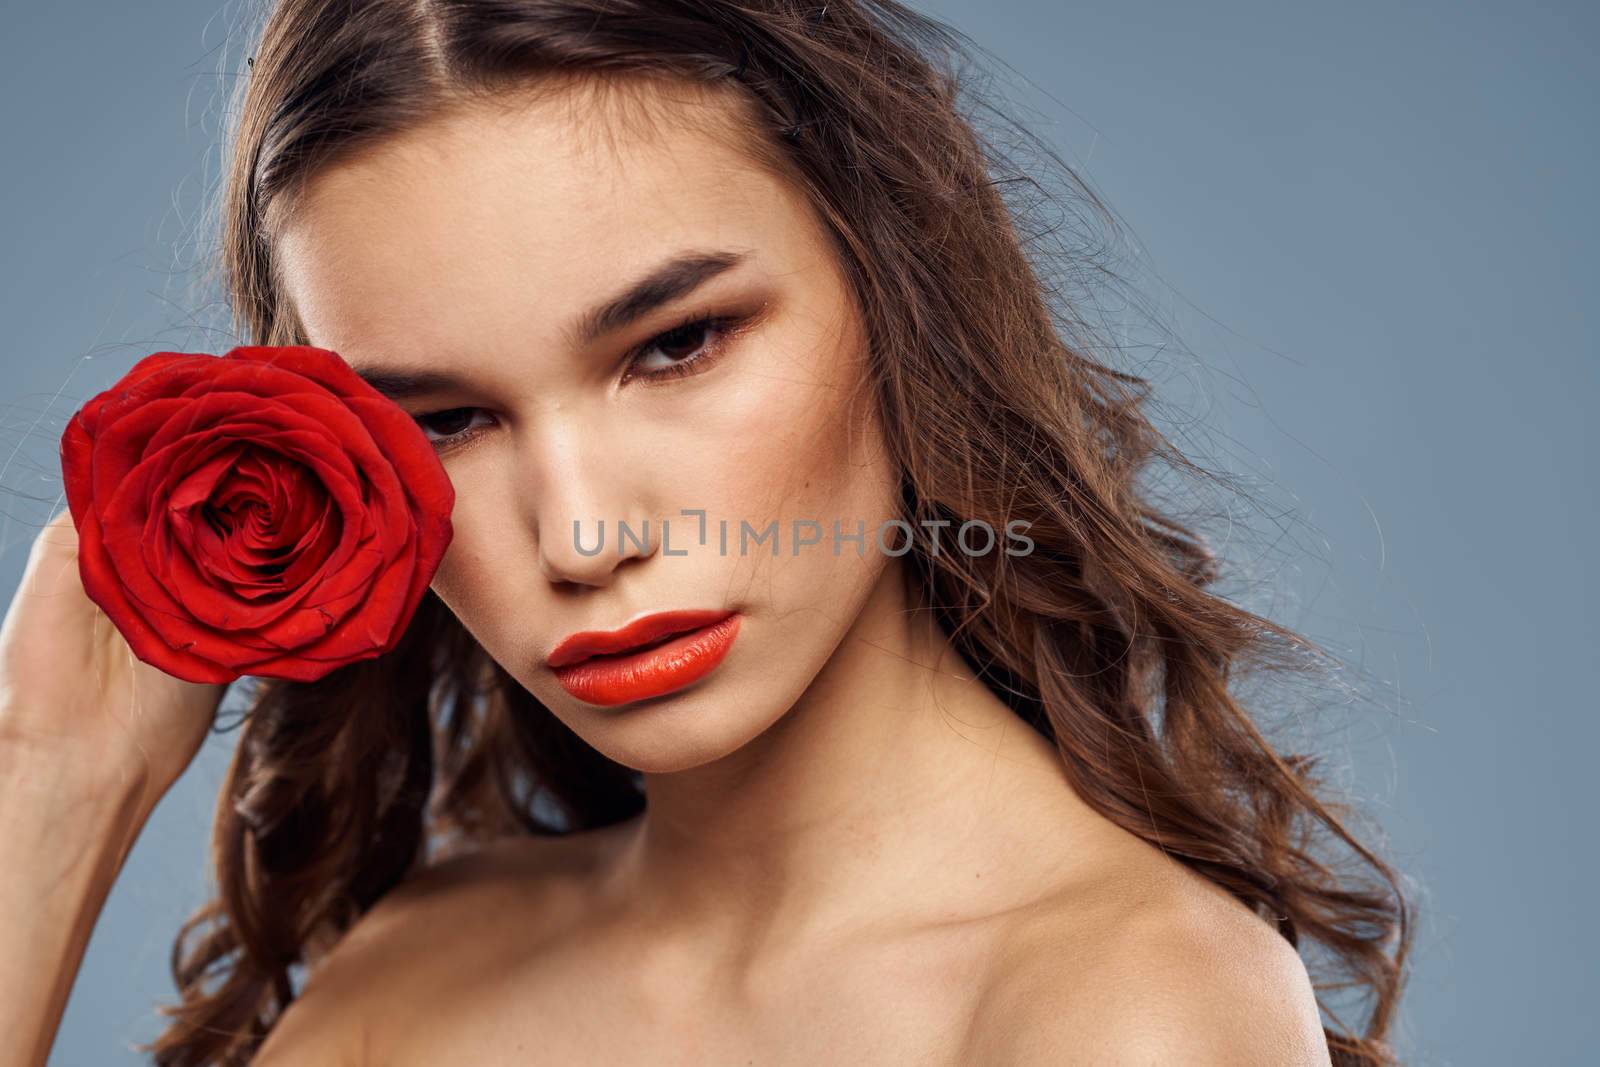 Portrait of a woman with a red rose in her hands on a gray background naked shoulders evening makeup by SHOTPRIME